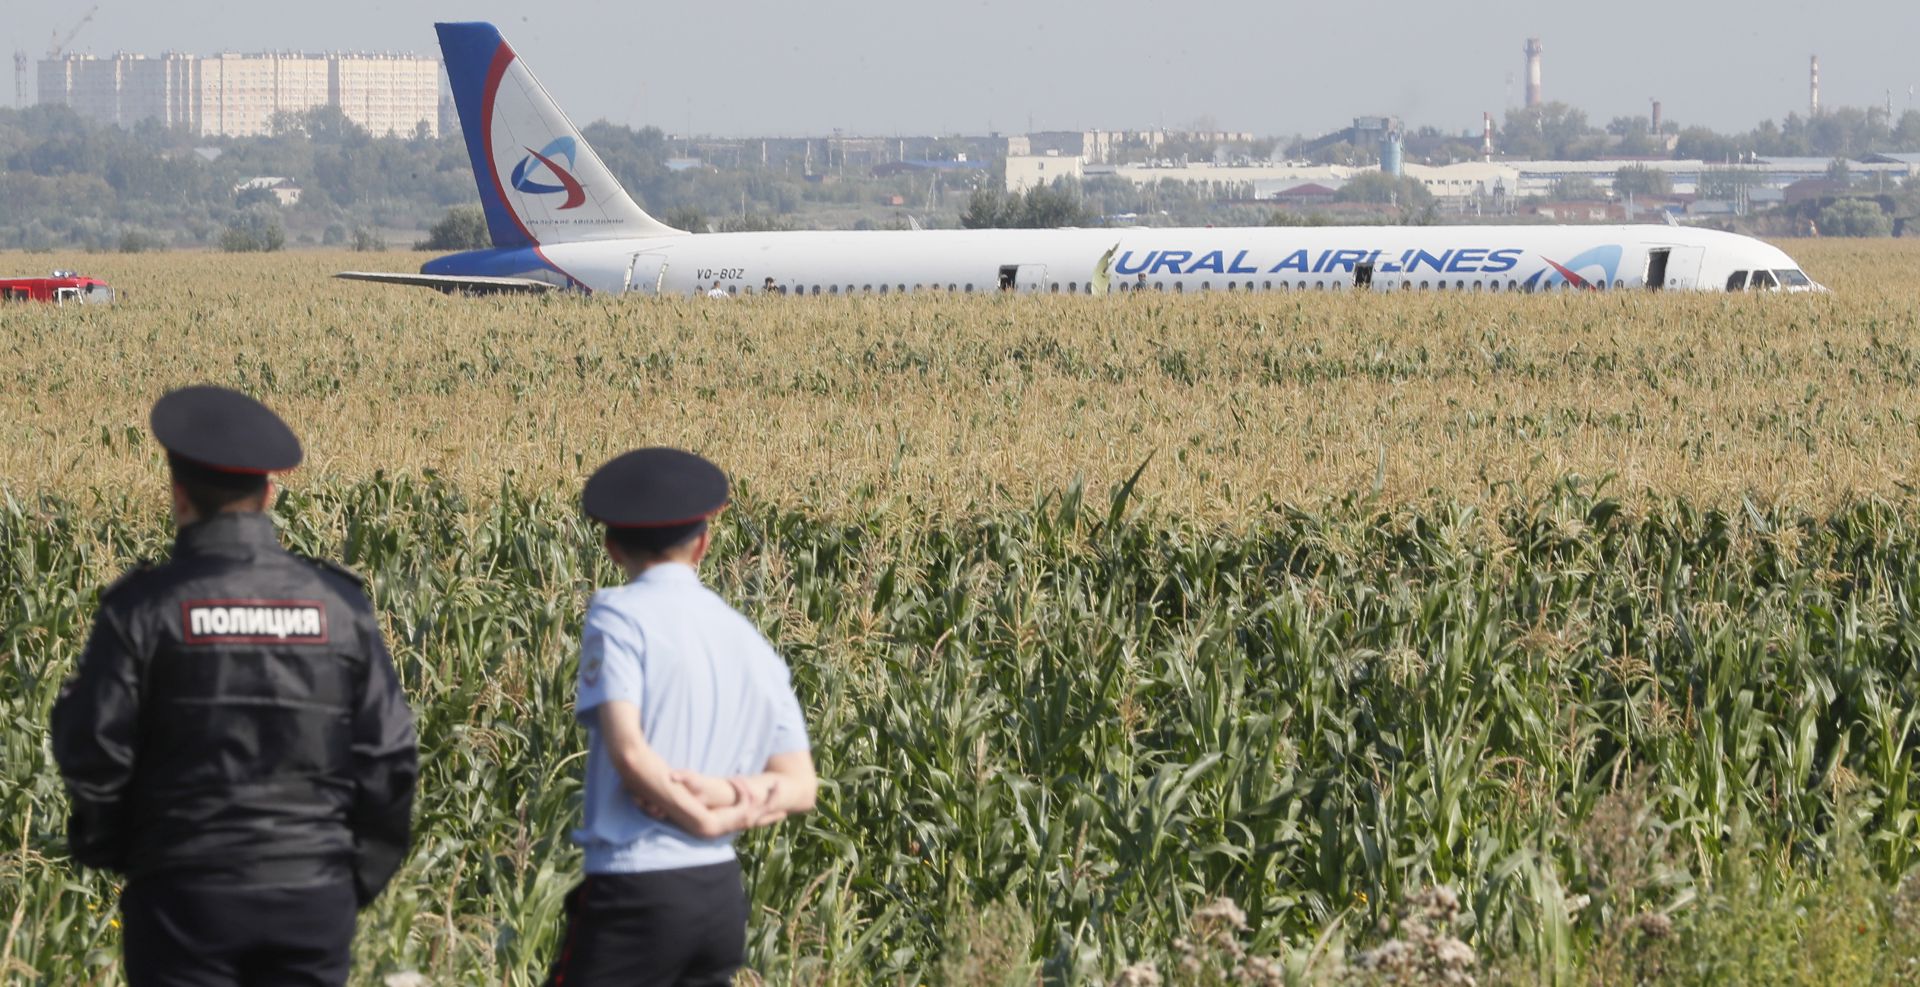 epa07774163 Russian police officers near the site of Ural Airlines A-321 passenger plane emergency landing outside Zhukovsky airport in Ramensky district of Moscow region, Russia, 15 August 2019. A-321 with 226 passengers and seven crew members on board en-route from Moscow to Simferopol made emergency landing after a right engine failure following the plane's colliding with seagulls shortly after take-off. Ten people were hospitalized following the accident.  EPA/SERGEI ILNITSKY